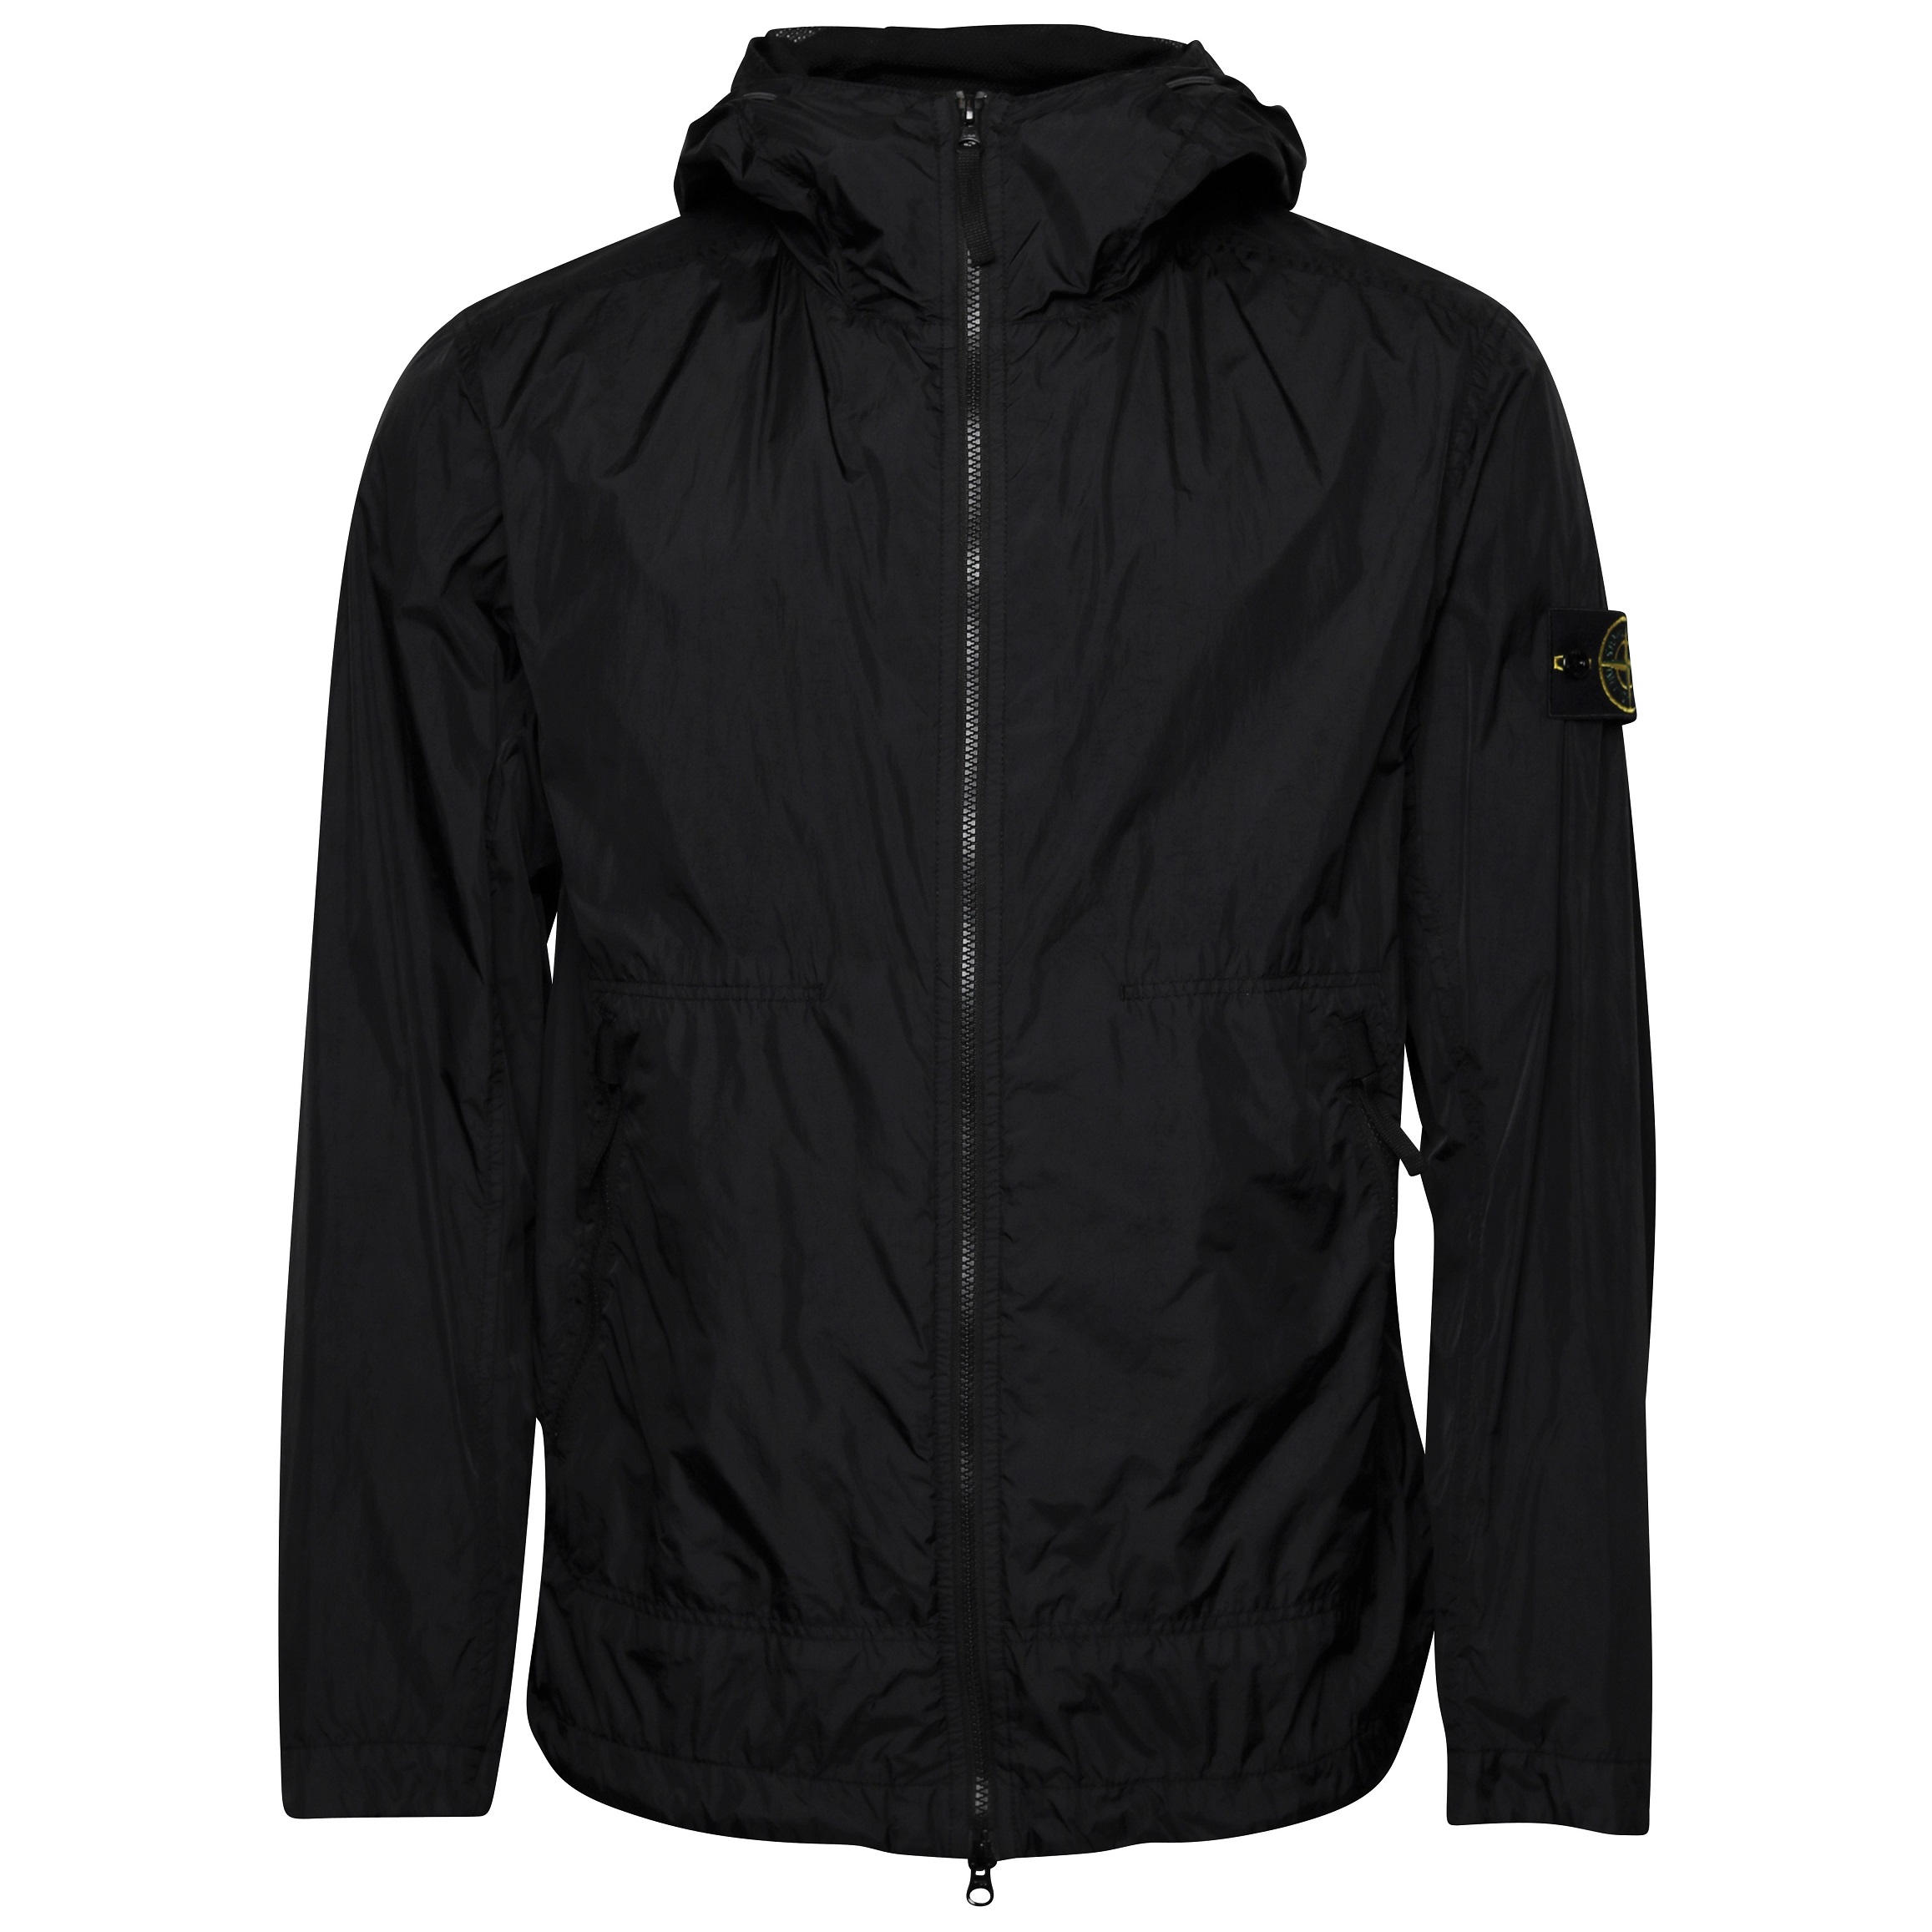 Stone Island Garment Dyed Crinkle Reps Hooded Light Jacket in Black XL